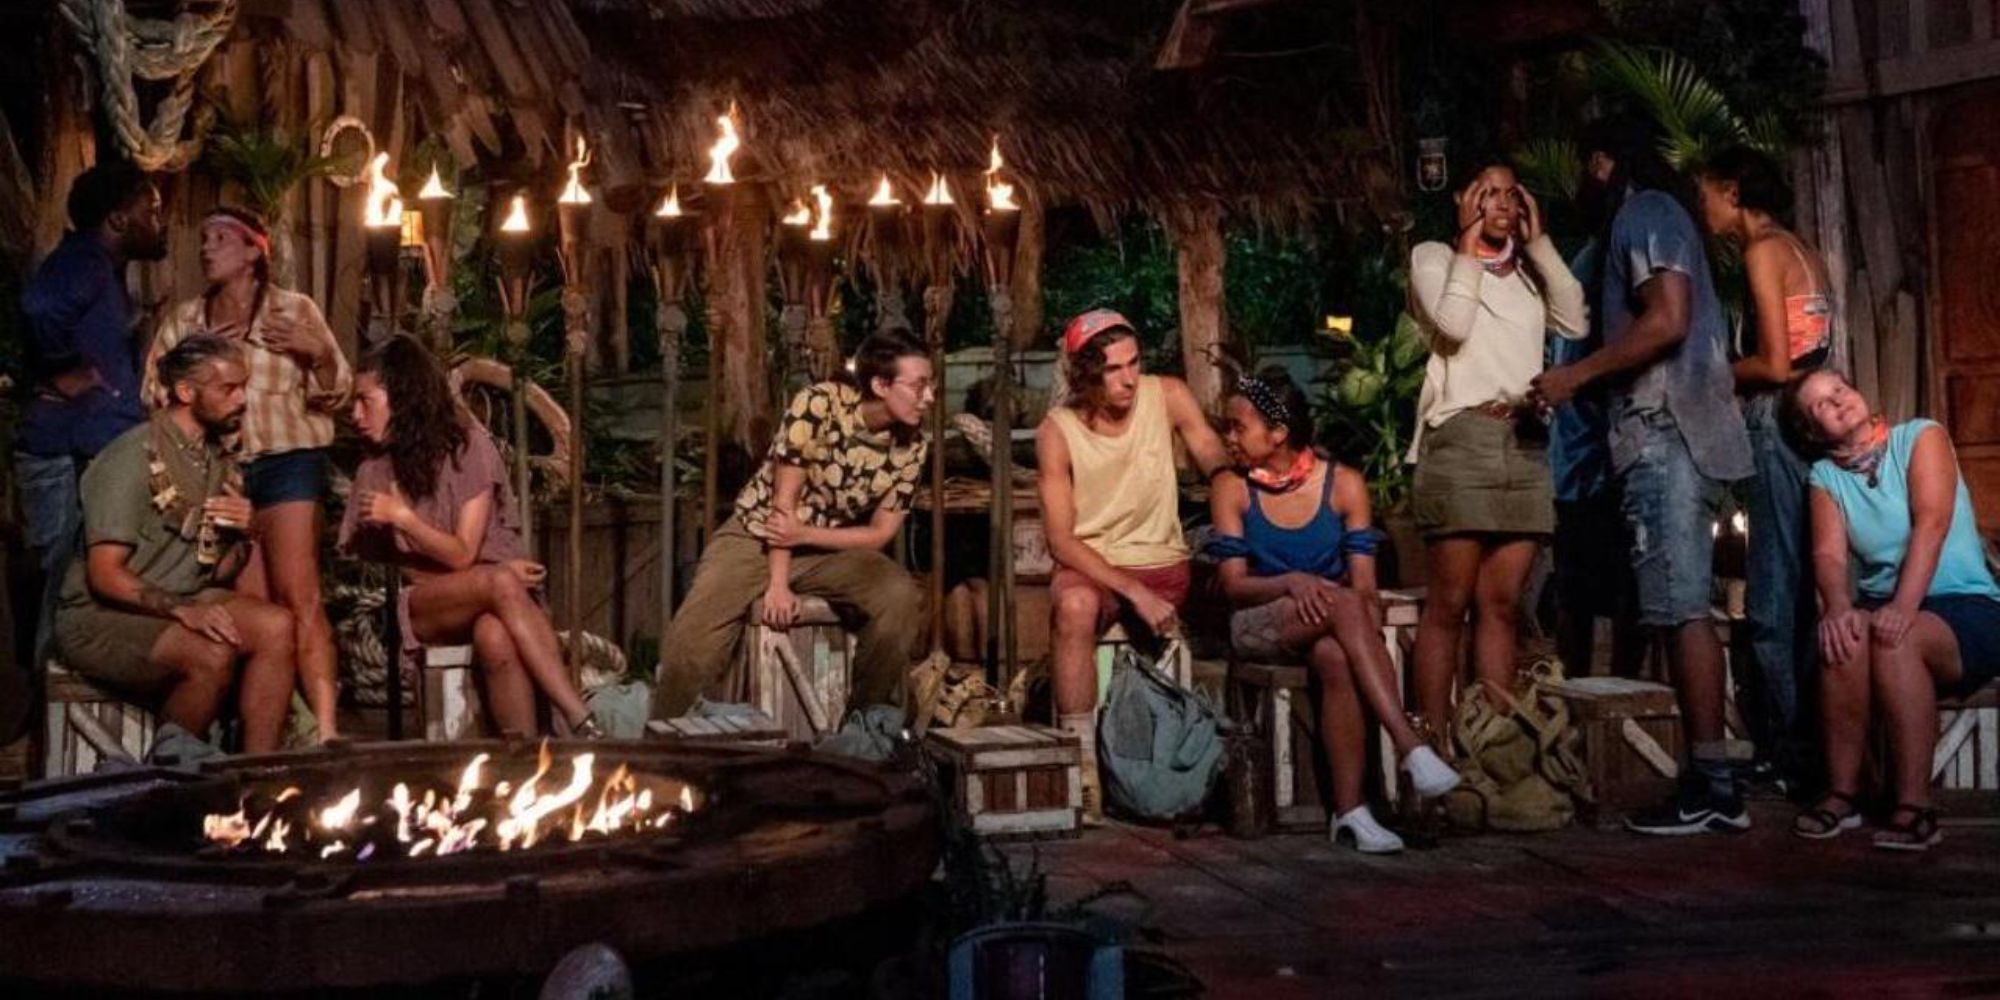 Contestants whisper and talk amongst themselves during tribal council in Season 41 of Survivor